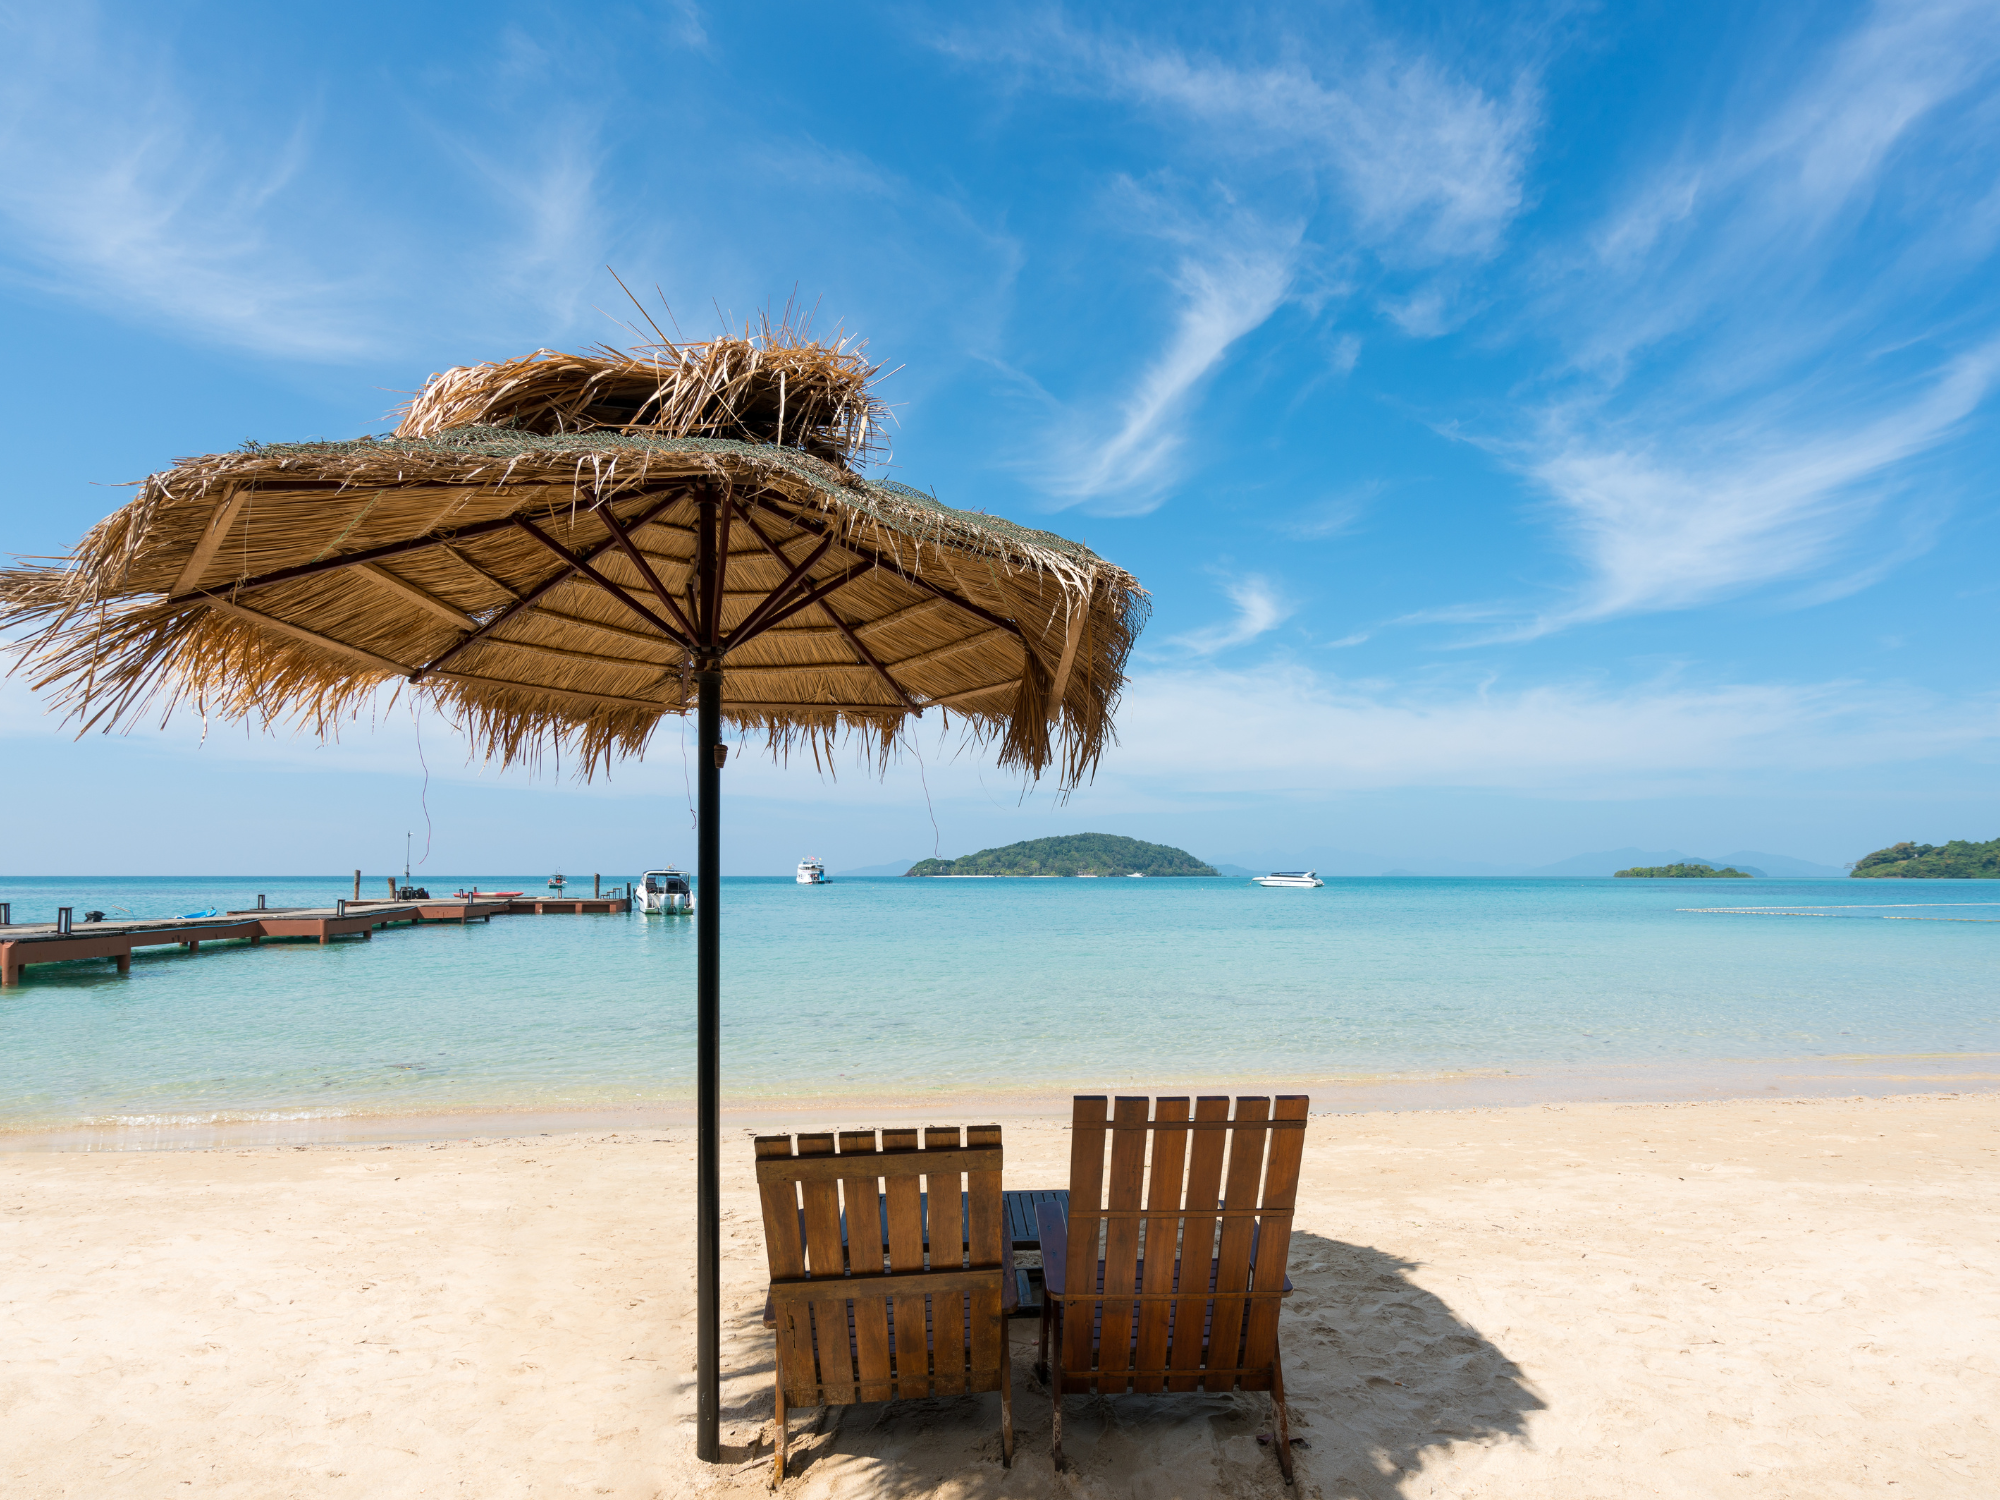 Things to do during your trip to Thailand from UAE - Relax on the beaches of Phuket